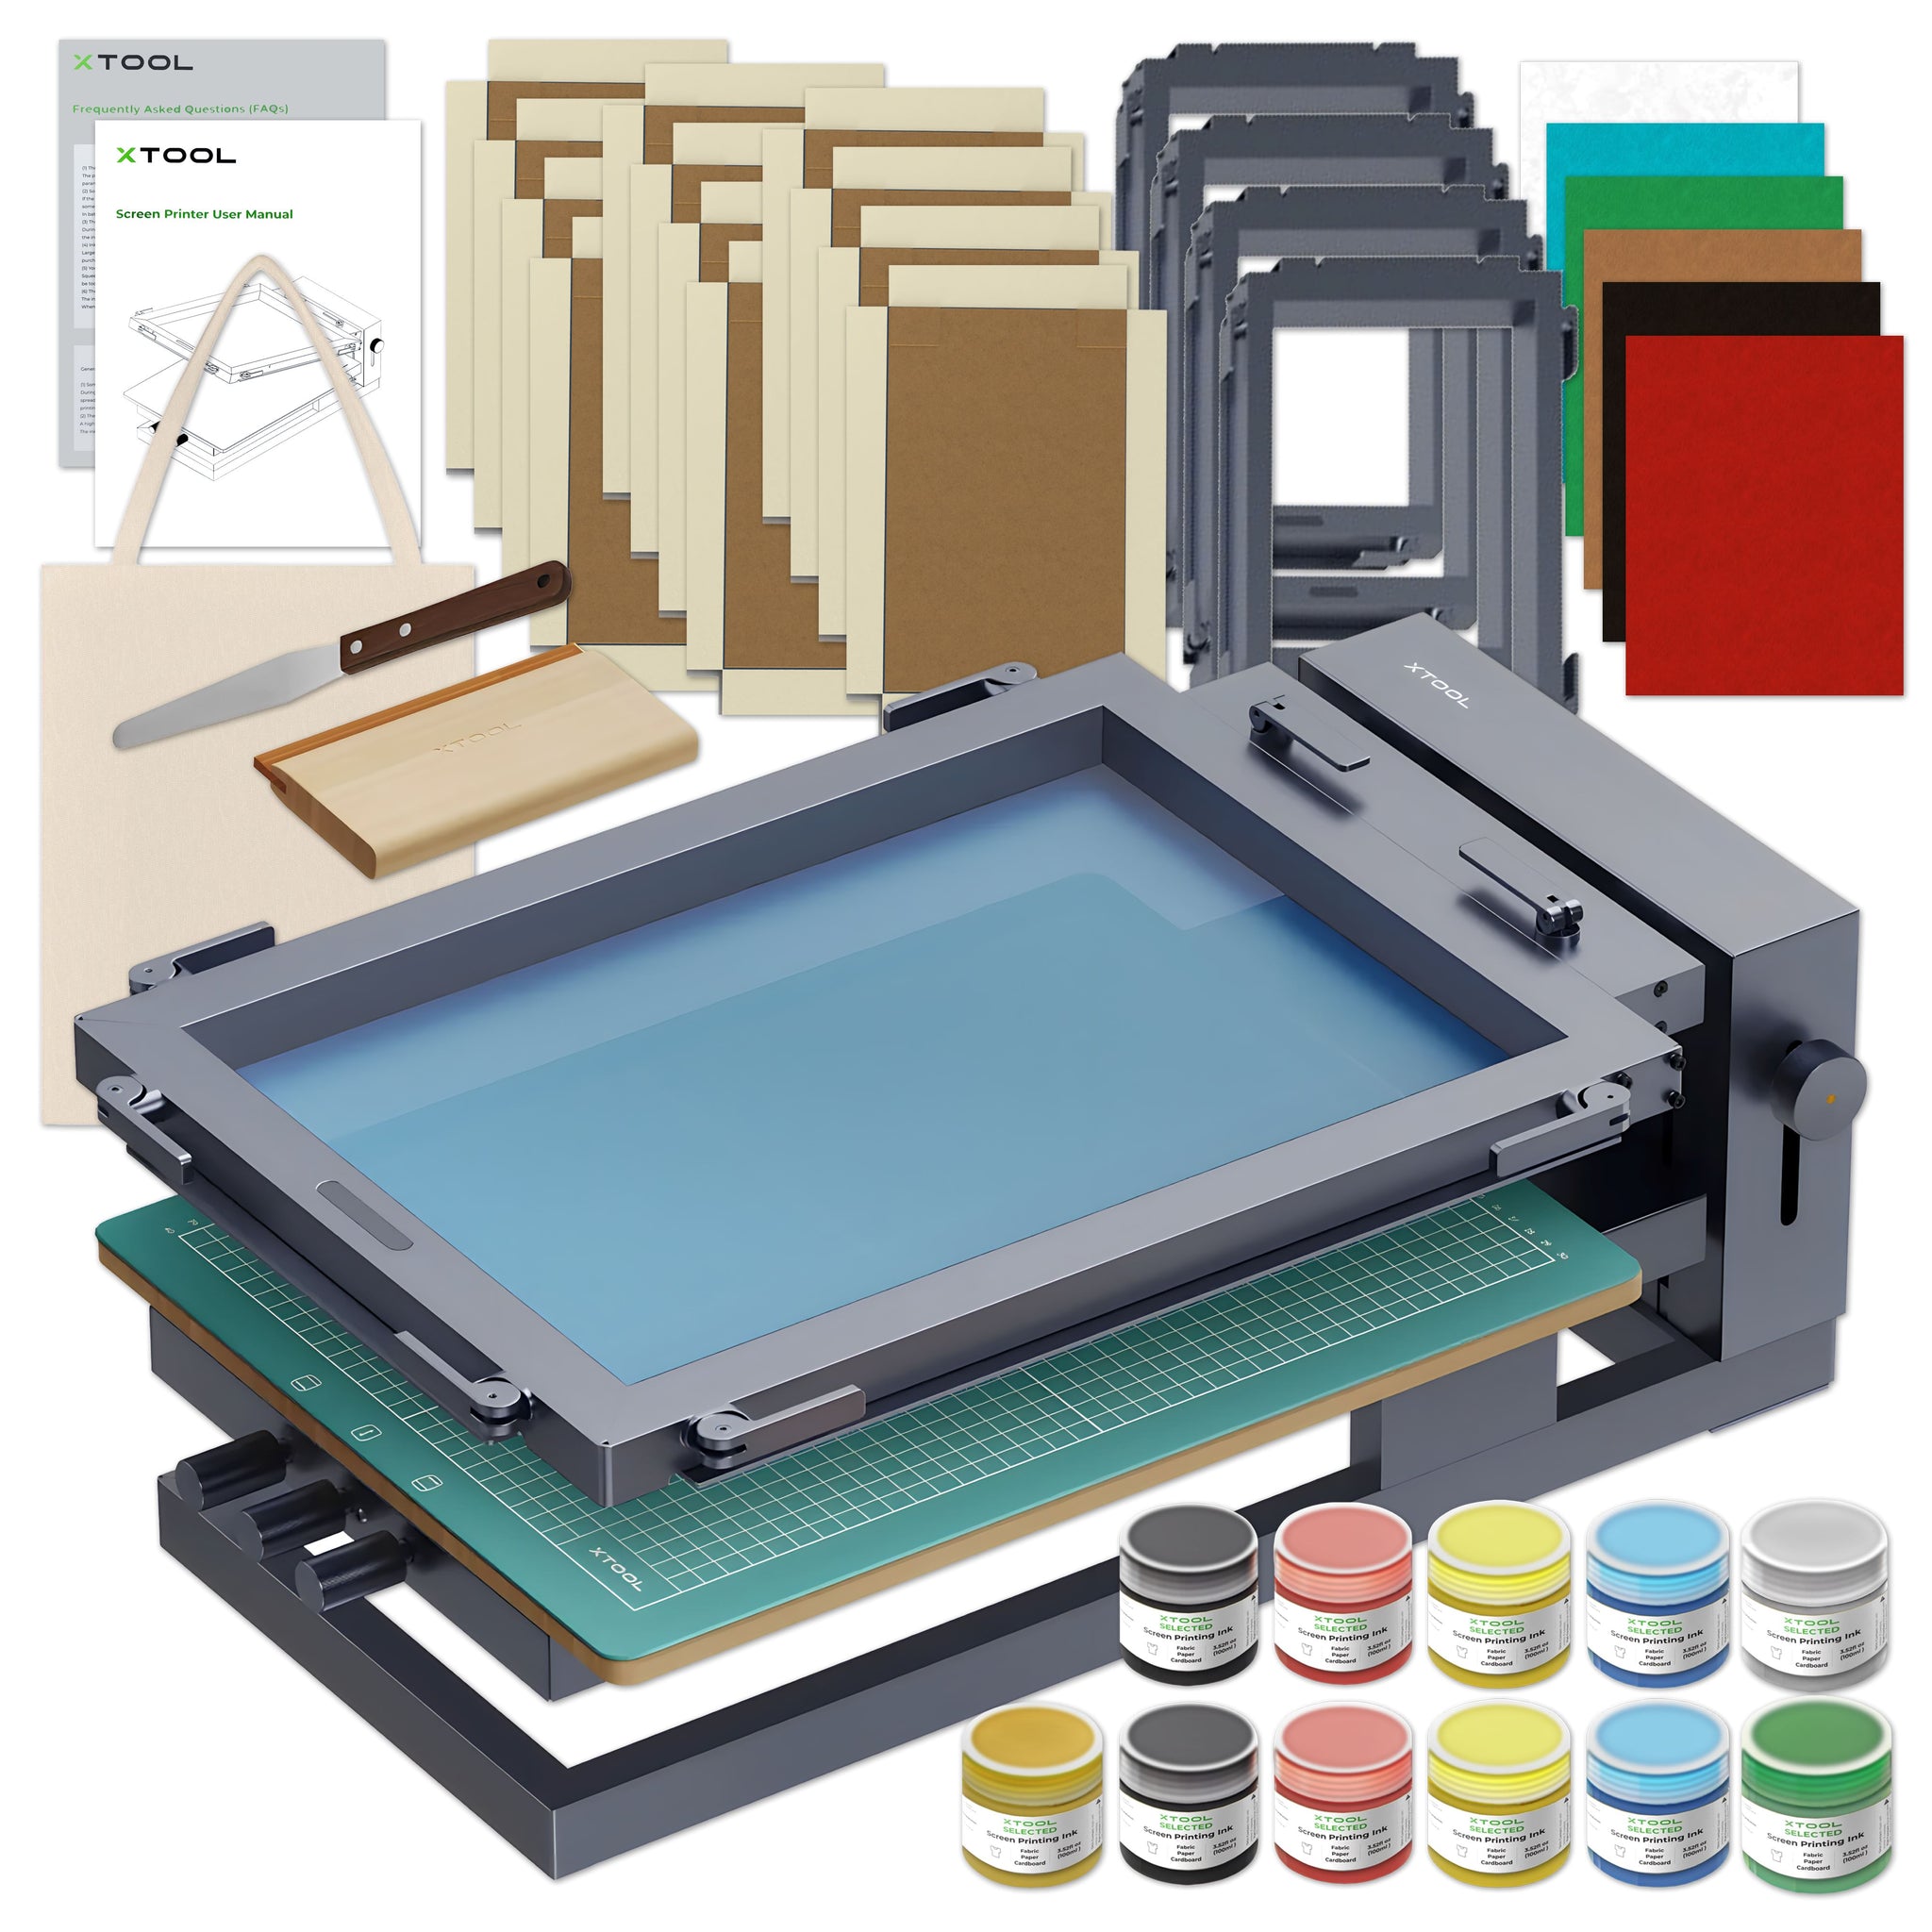 xTool Accelerates Design Production and Output with the New xTool Screen  Printer